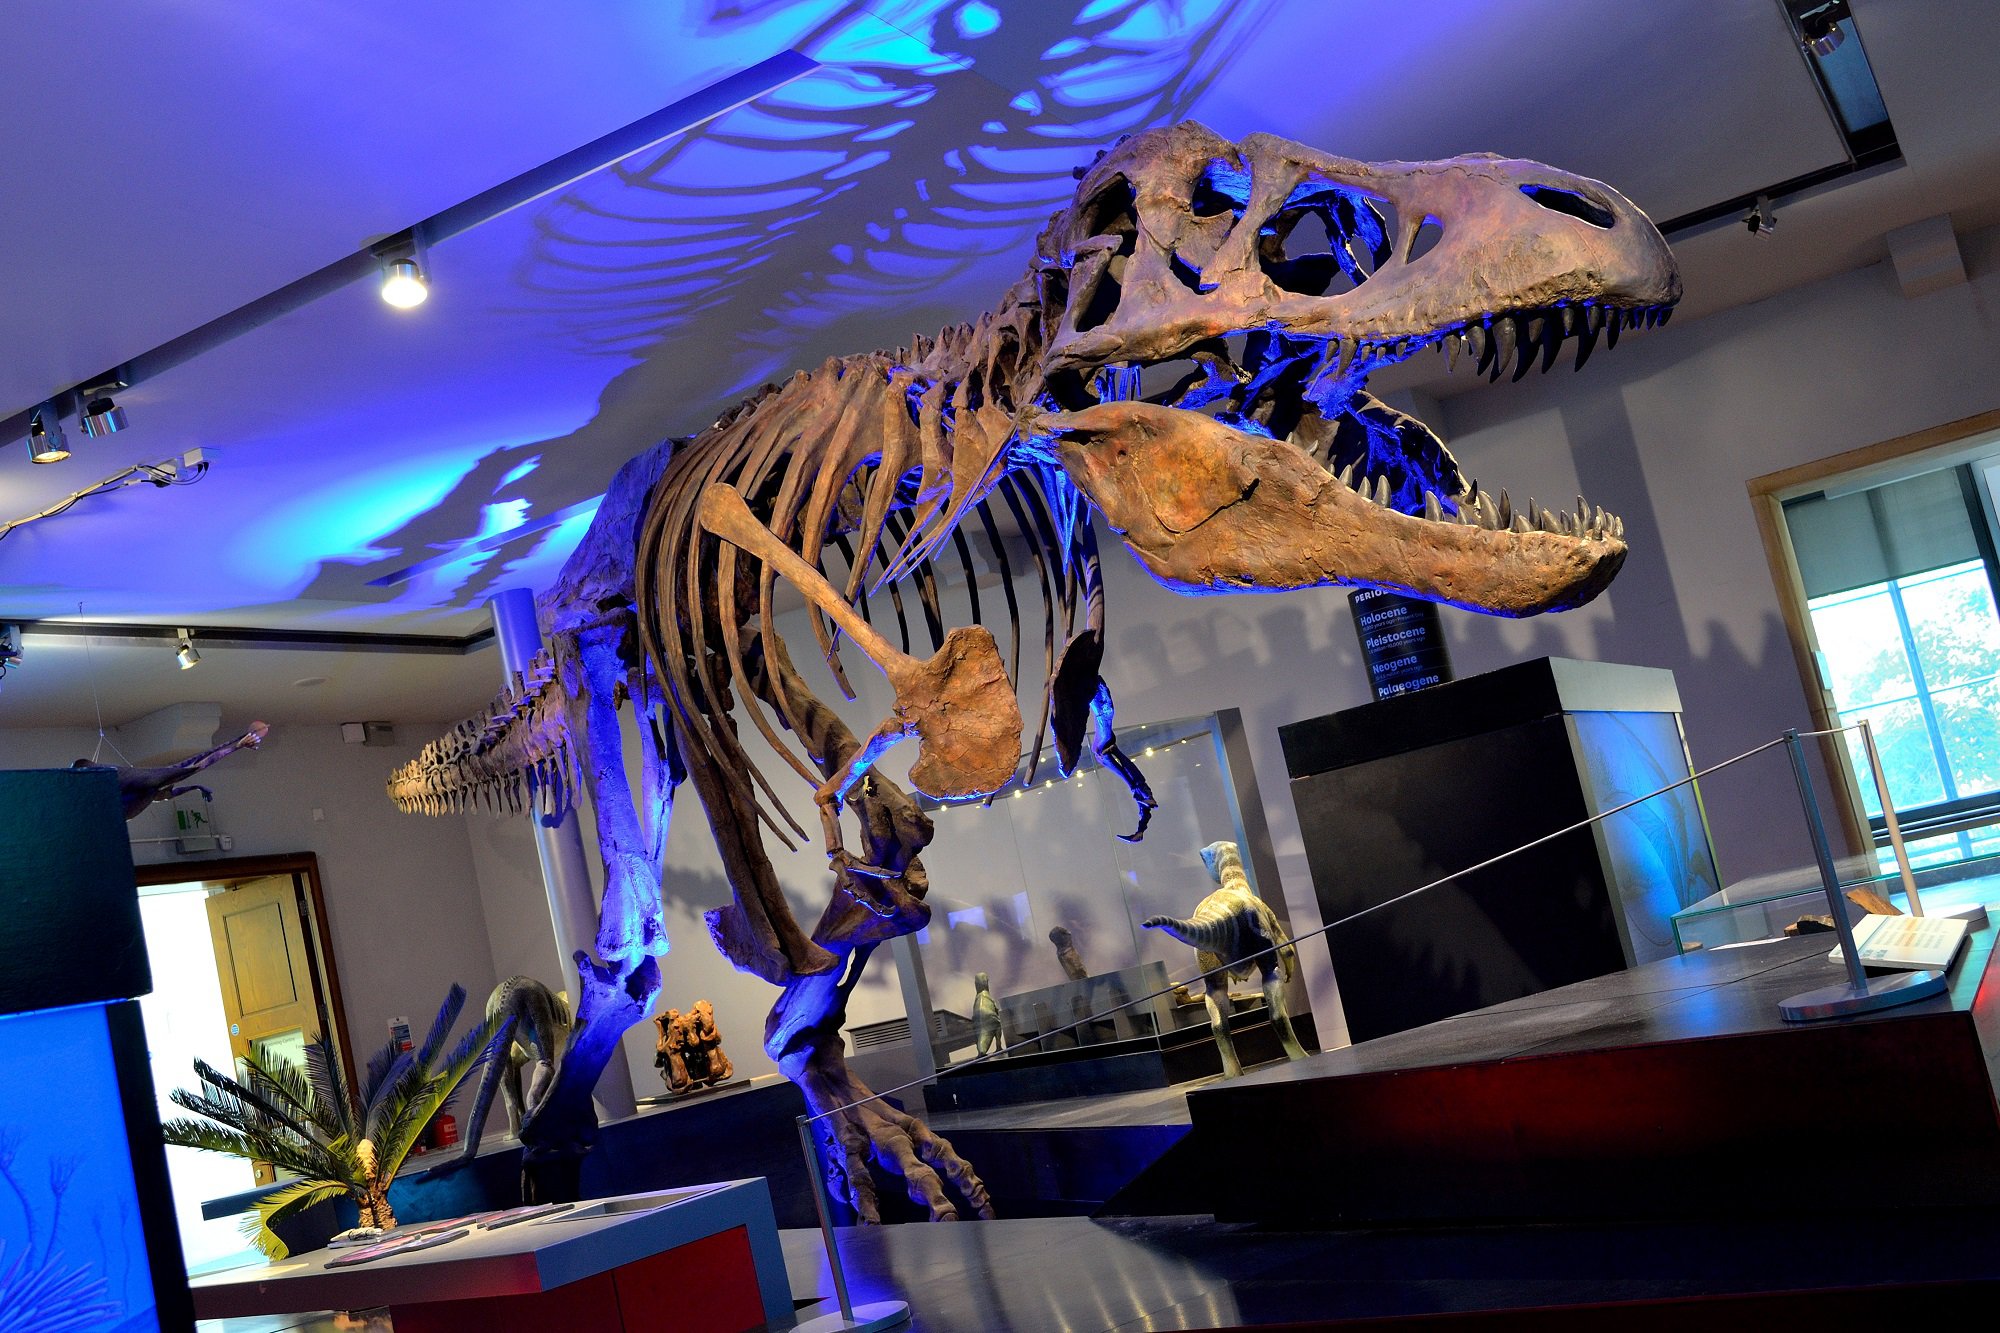 A full-size T. rex skeleton in a museum with dramatic blue lighting